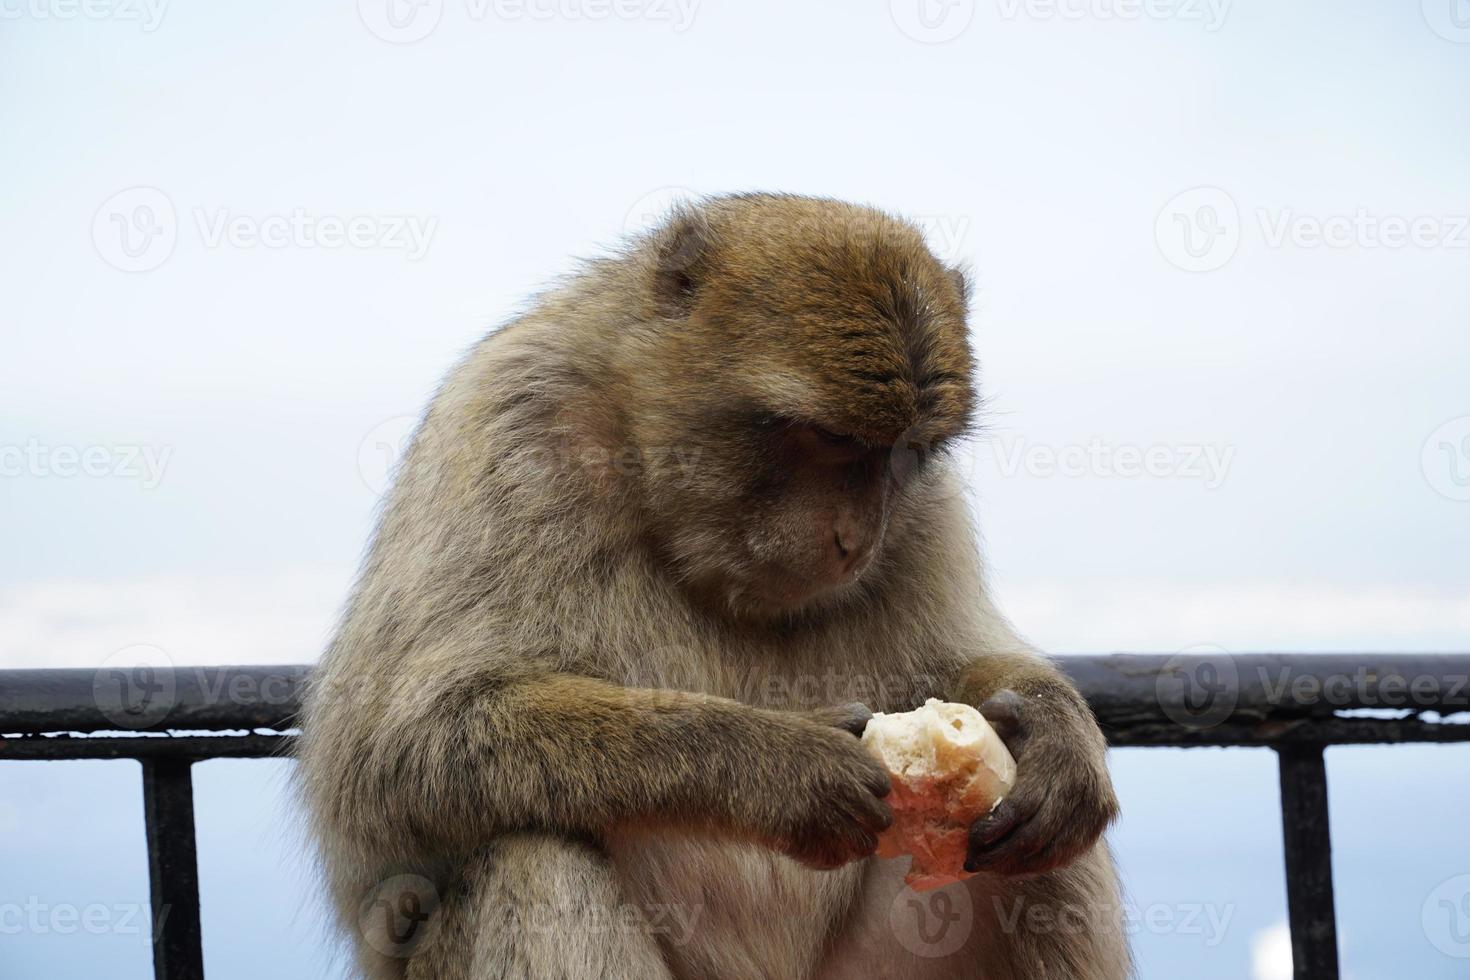 Single Barbary Macaque Monkey Eating a Roll photo